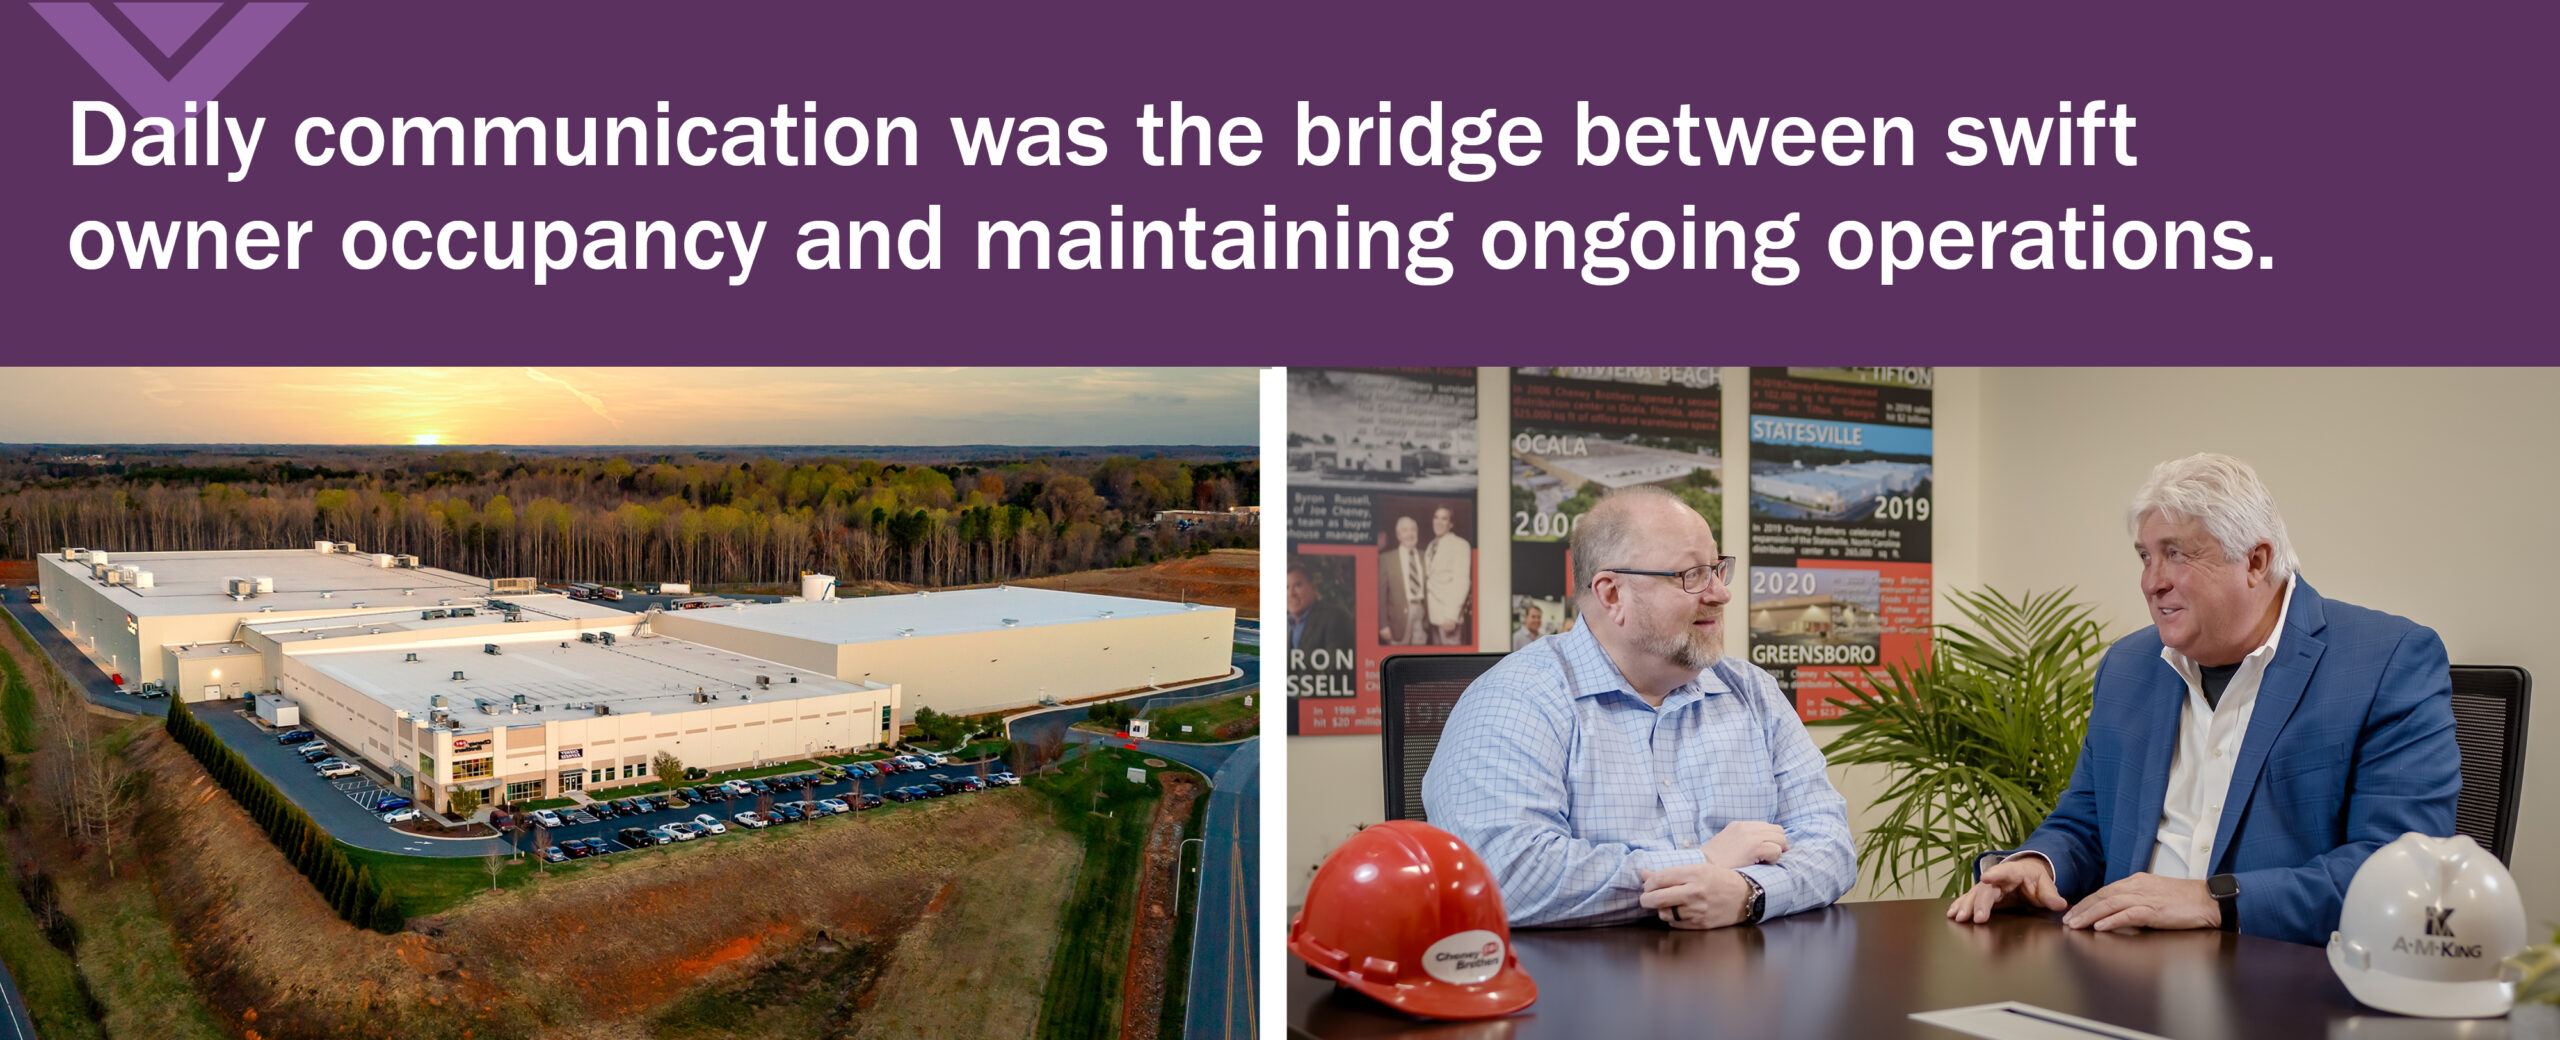 Design Solutions: Daily communication was the bridge between swift owner occupancy and maintaining ongoing operations.